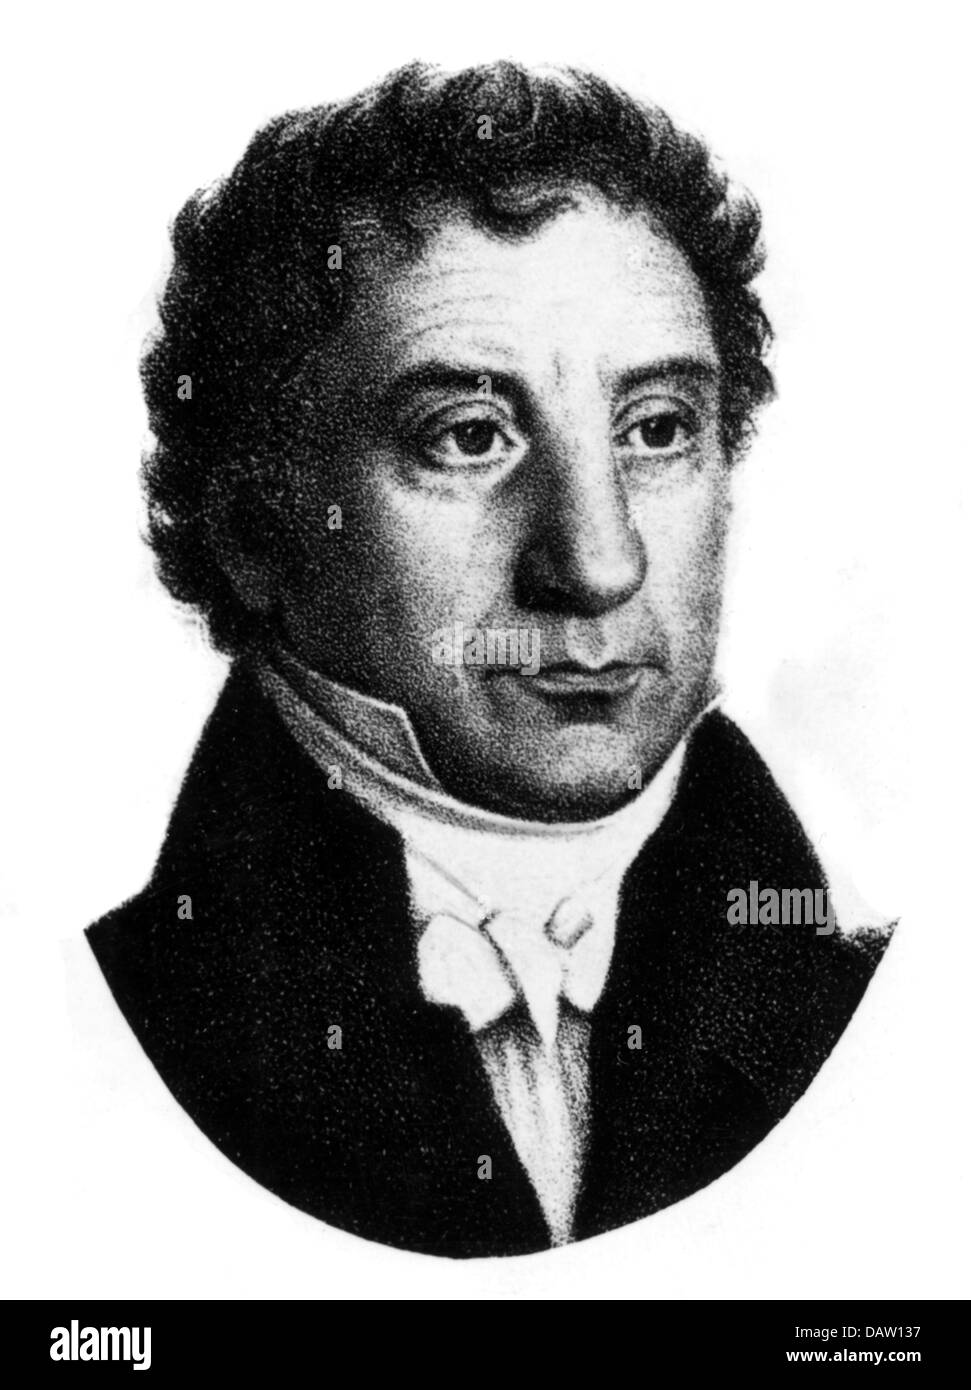 Sertuerner, Friedrich Wilhelm, 19.6.1783 - 20.2.1841, German pharmacologist, analysis of the opium and detection of the morphine (specification 1817), portrait, lithograph, circa 1820, Stock Photo